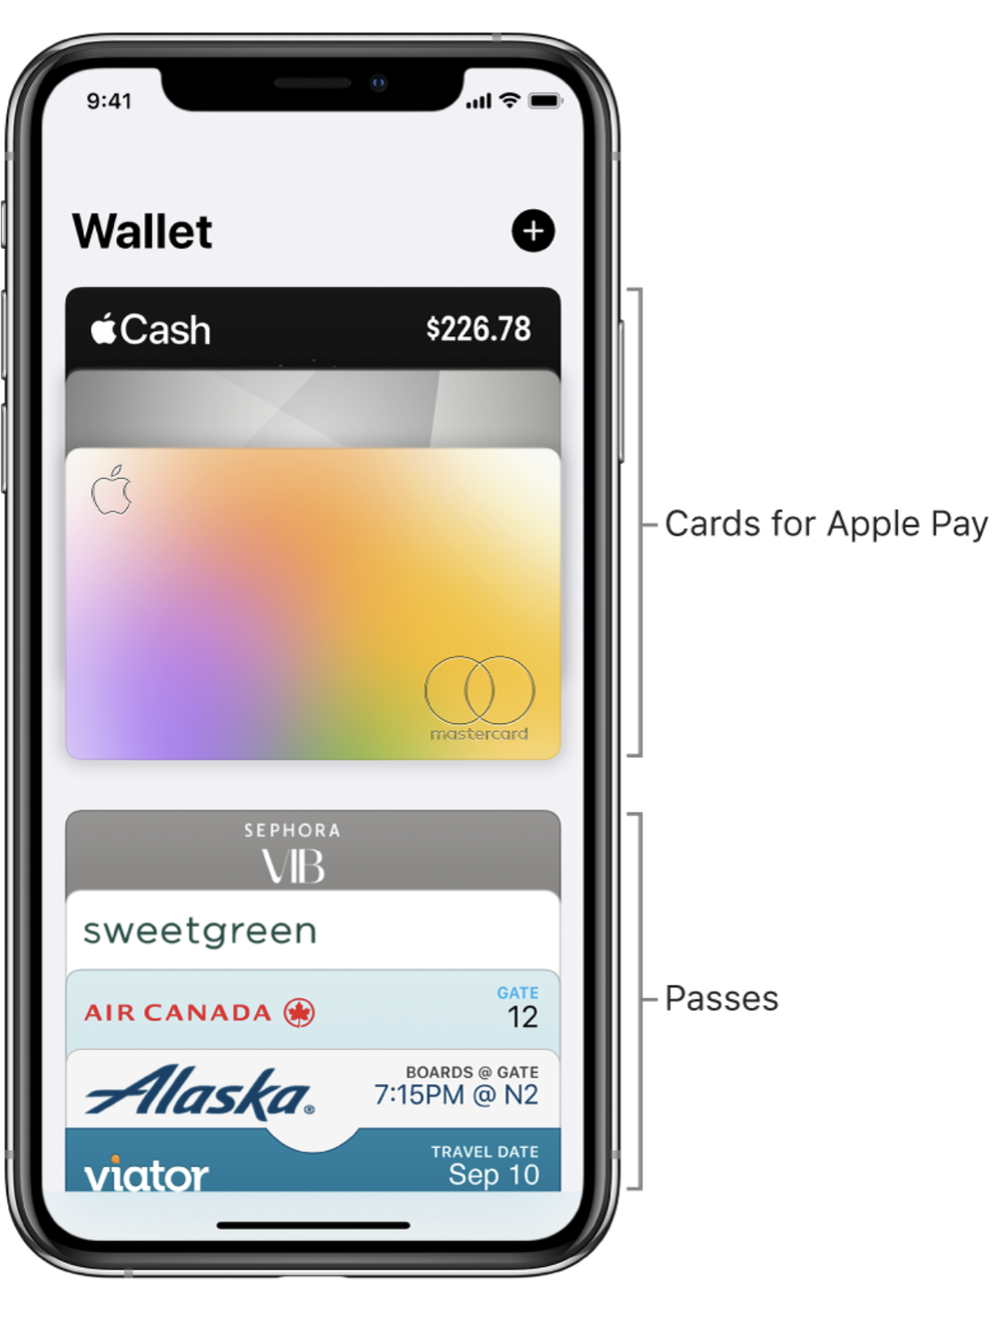 How to Use Apple Wallet: Add Tickets, Boarding Passes & More